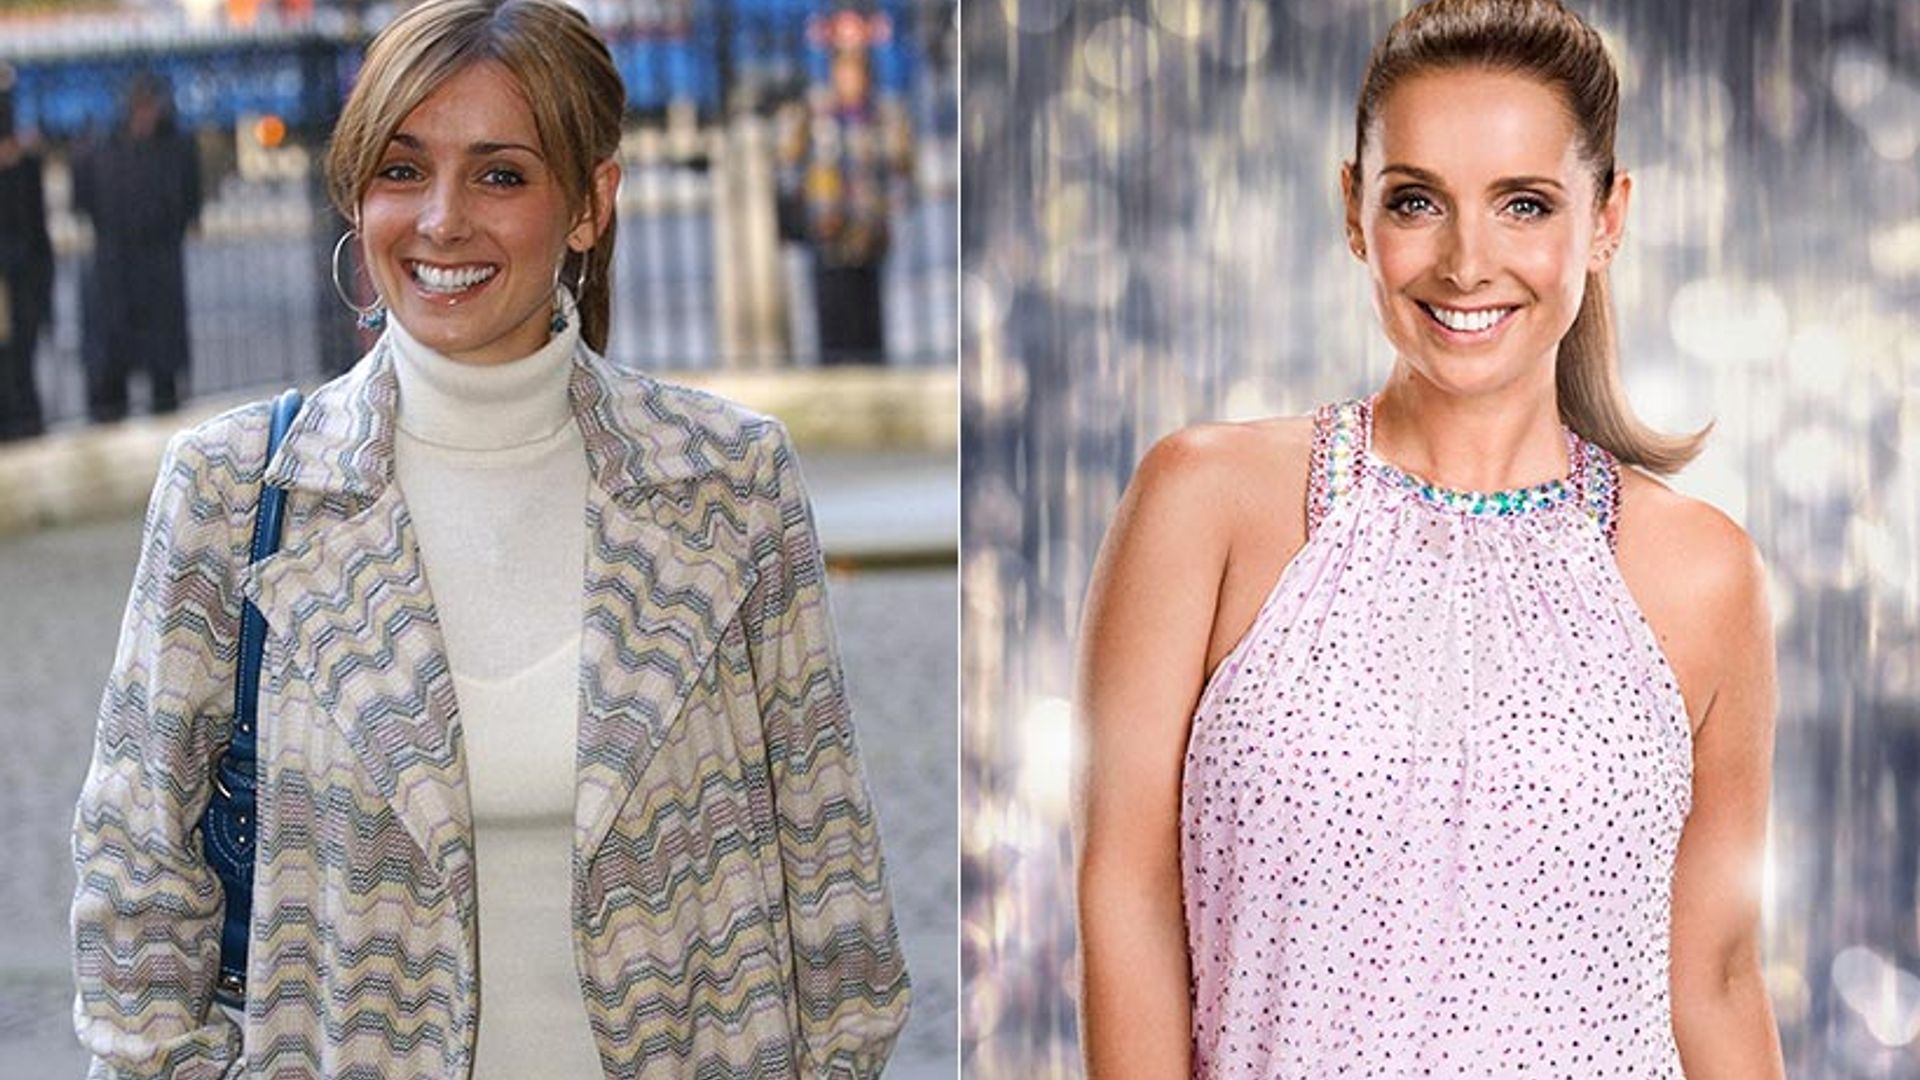 Proof that Louise Redknapp hasn't changed after 25 years in the public eye